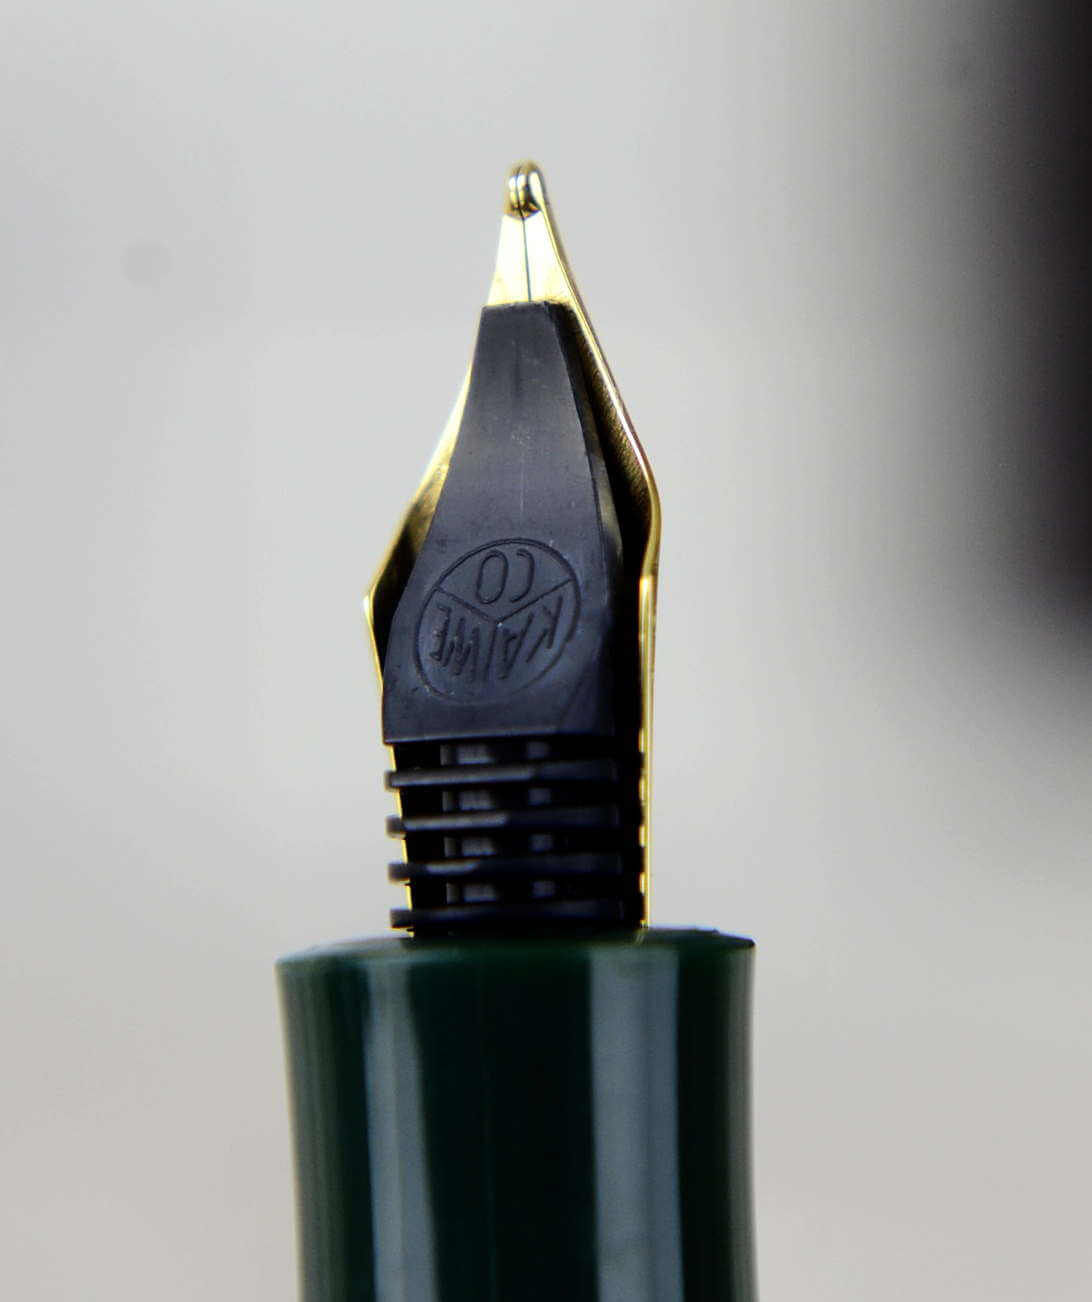 https://antikcart.com/wp-content/uploads/2019/10/Kaweco-sports-forest-green-fountain-pen-gold-plated-M-nib-original-germany.jpg